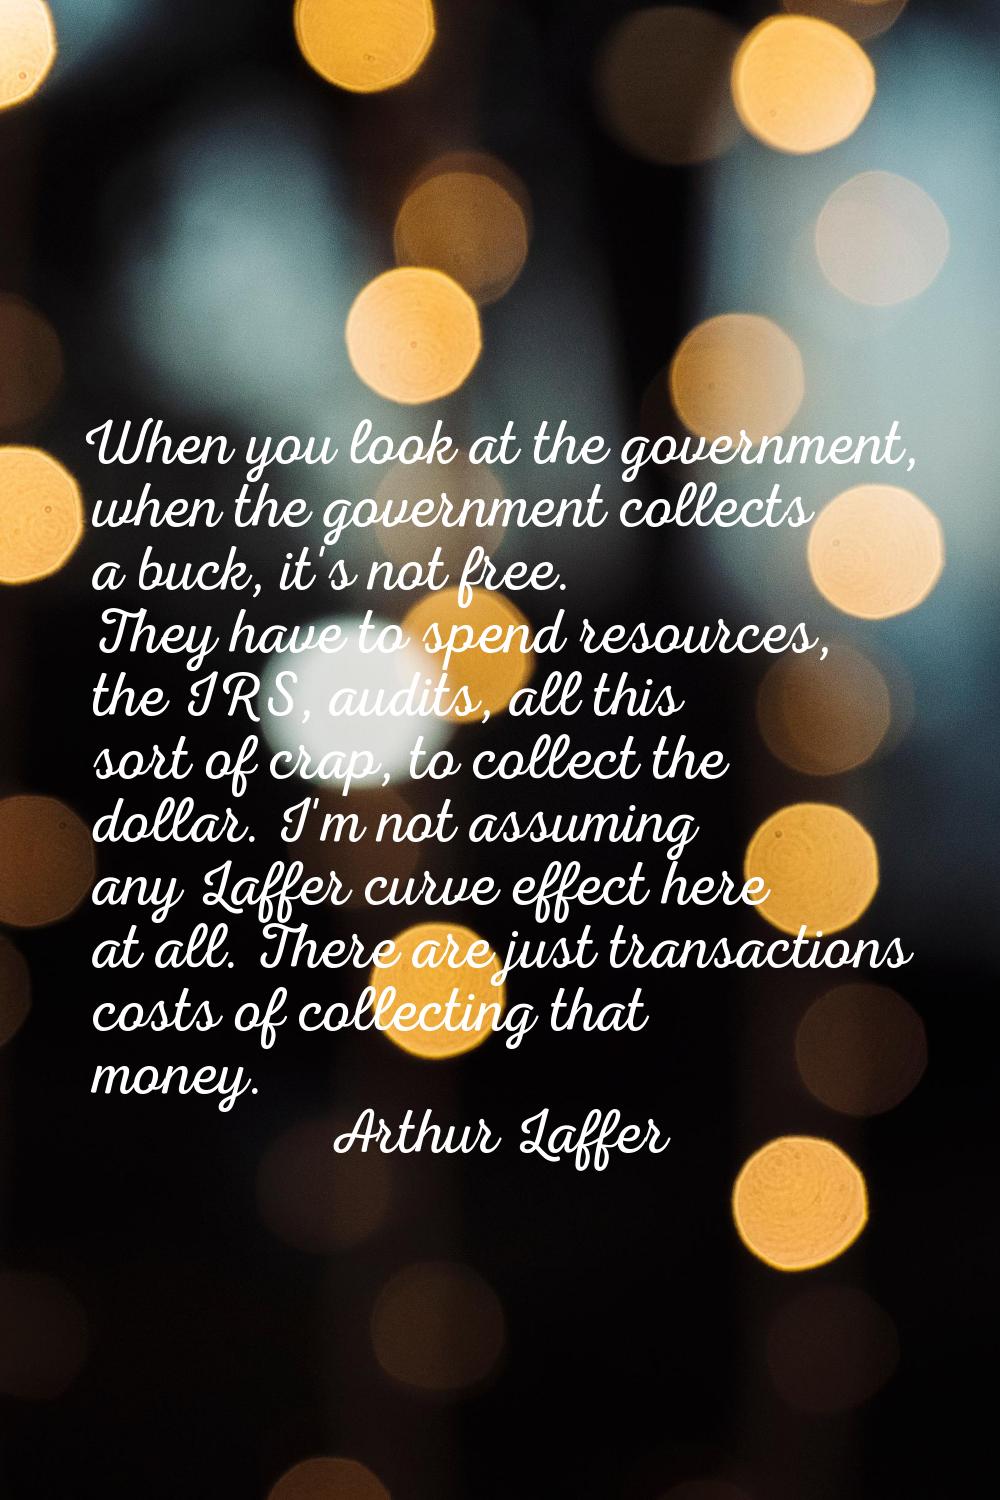 When you look at the government, when the government collects a buck, it's not free. They have to s